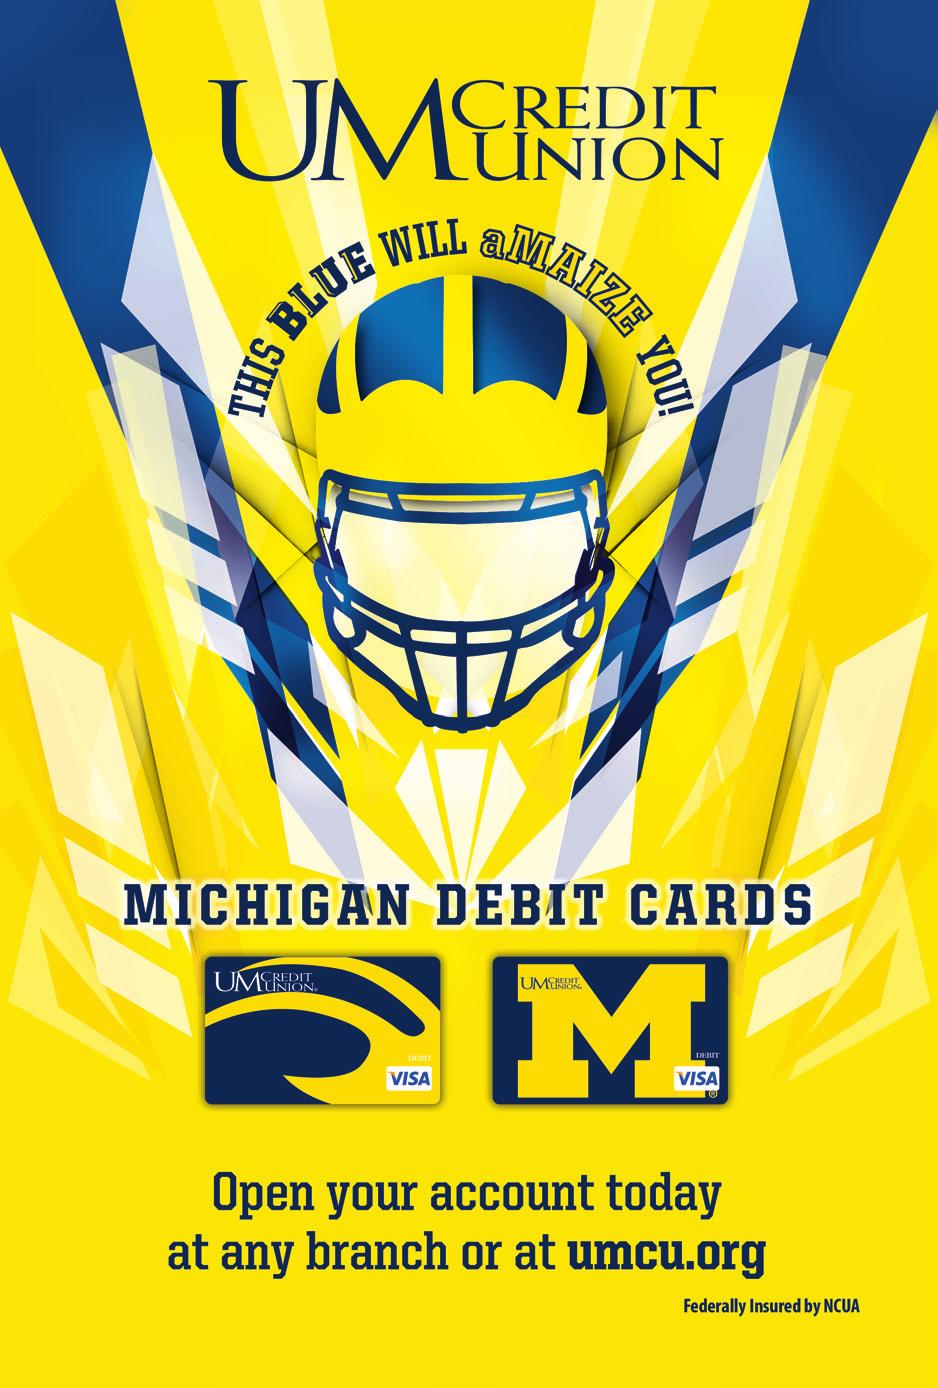 TICKETS AND ADMISSION Michigan Stadium gates will be open 2 hours prior to kick-off. Suites and Club Level Areas open 2.5 hours prior to kick-off.